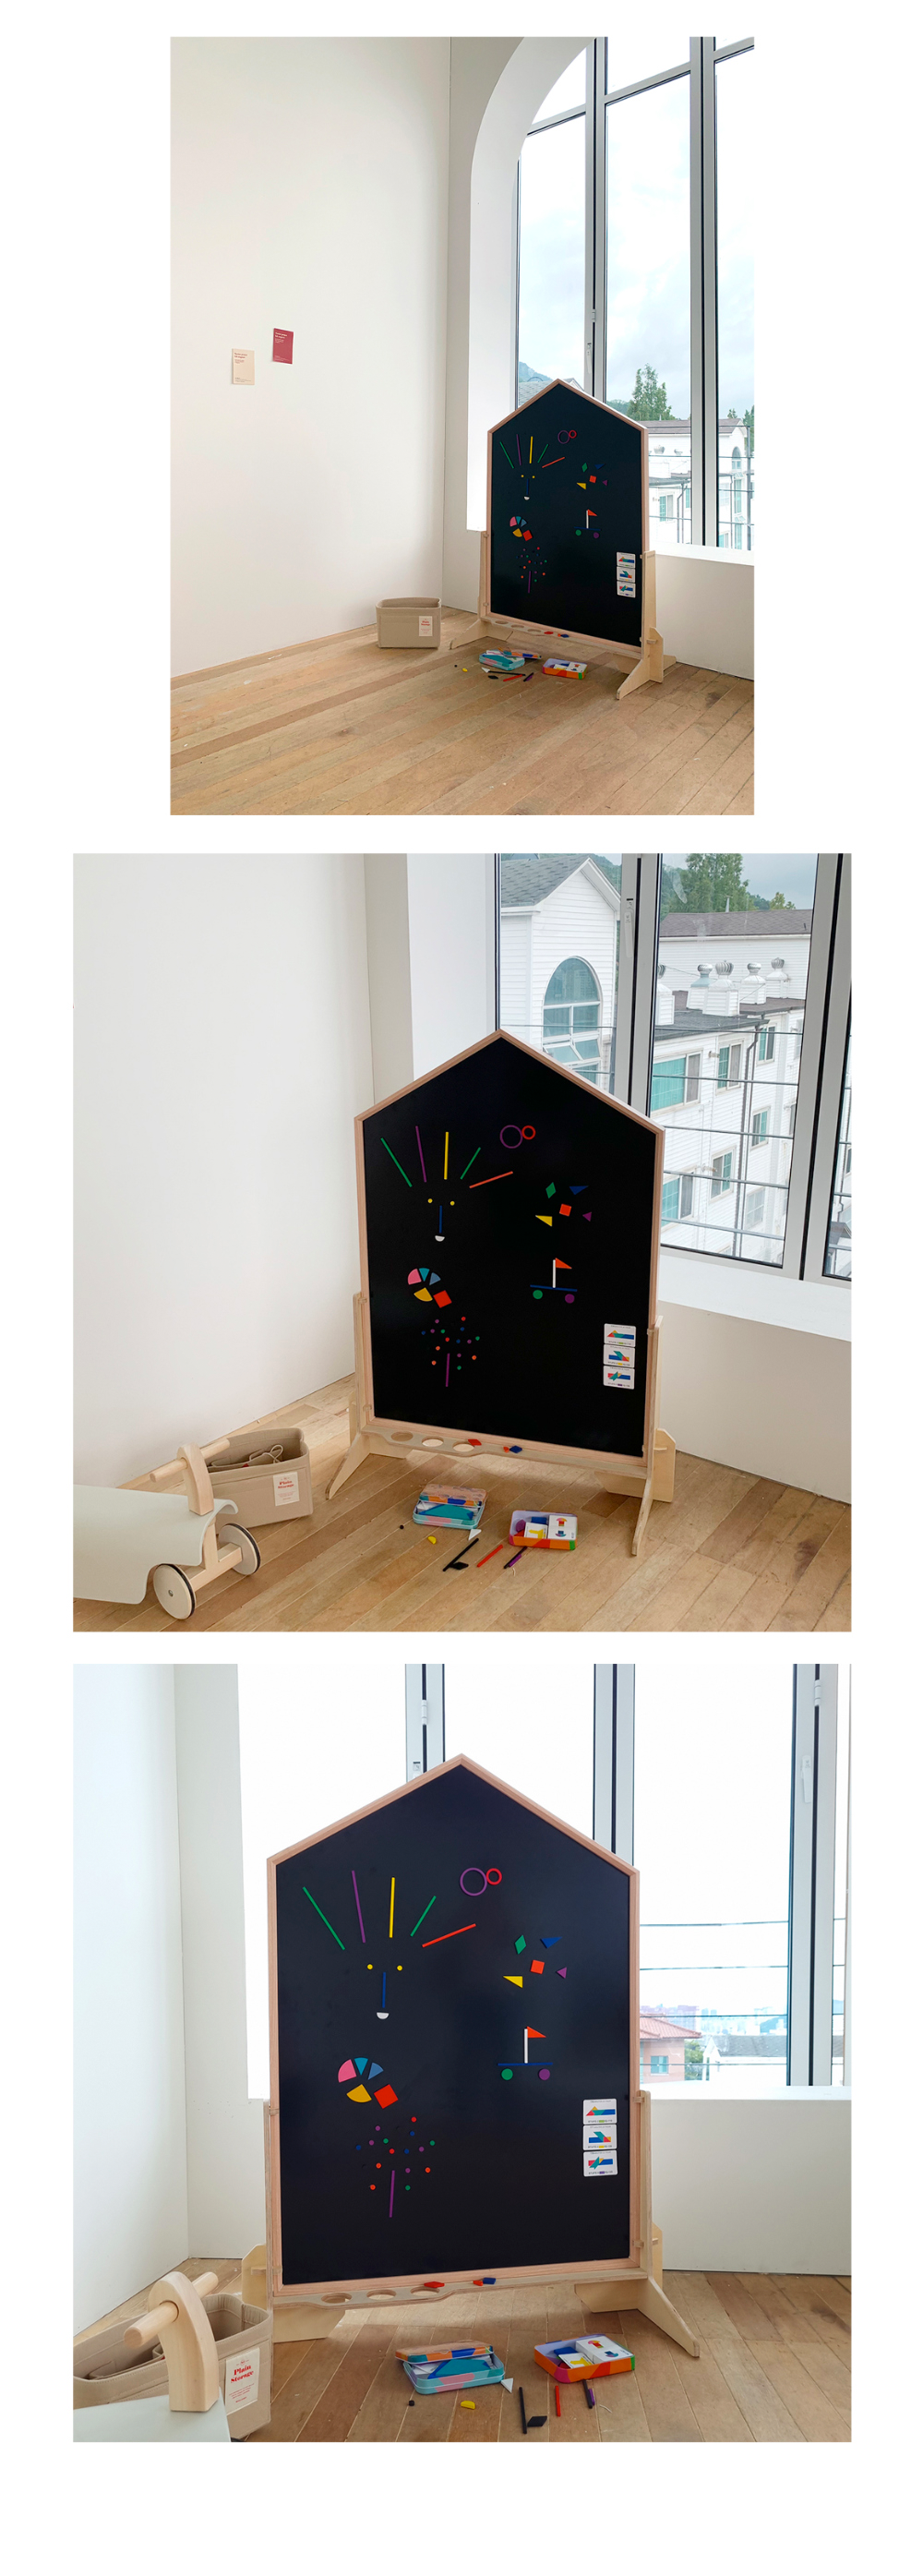 Noriterboard magnetic board stand